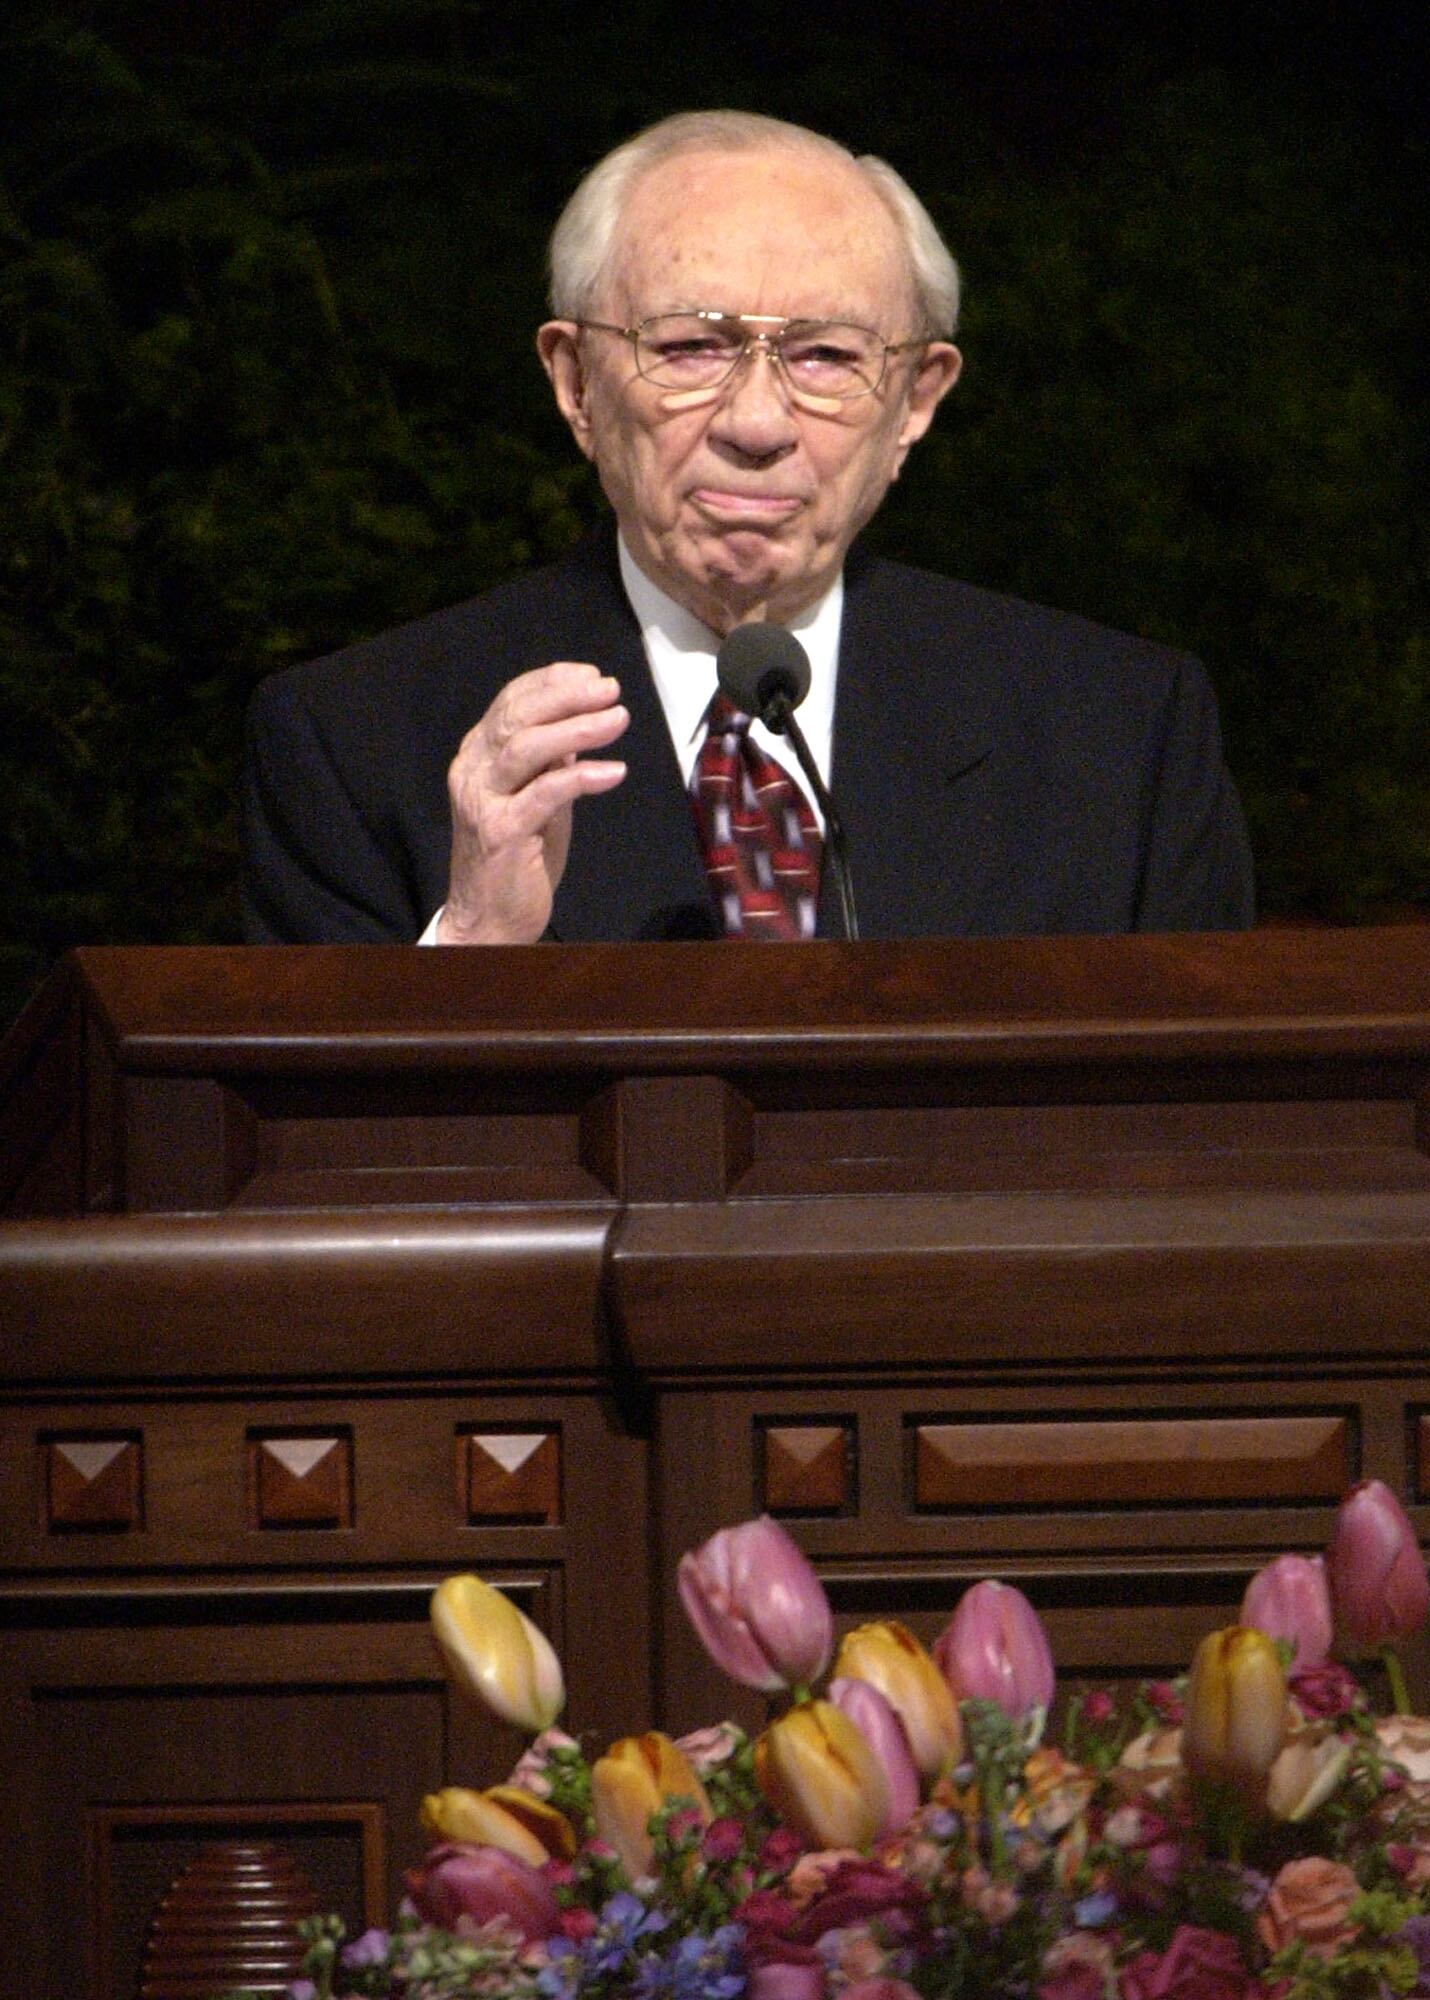 (The Salt Lake Tribune) President President Gordon B. Hinckley, speaking in General Conference in 2003, assured members that tithing funds would not be used for City Creek Center.